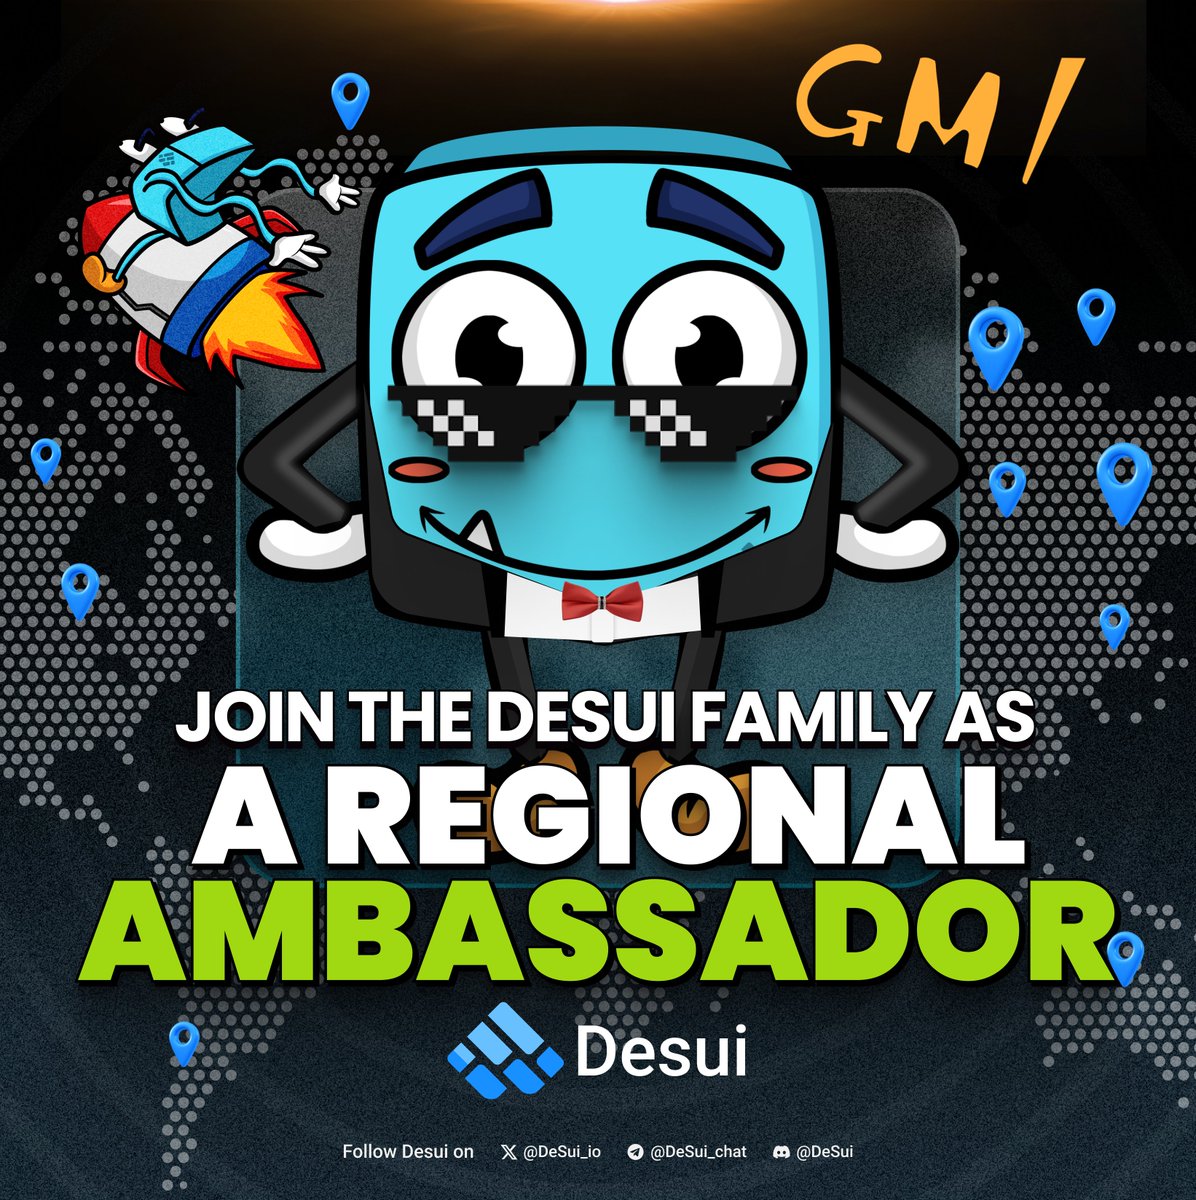 🌟 Join the DeSui family as a Regional Ambassador! 🌟

Are you passionate about fostering a vibrant and inclusive community? Do you possess excellent communication skills and a knack for leadership? DeSui is seeking enthusiastic individuals to represent our brand as Regional